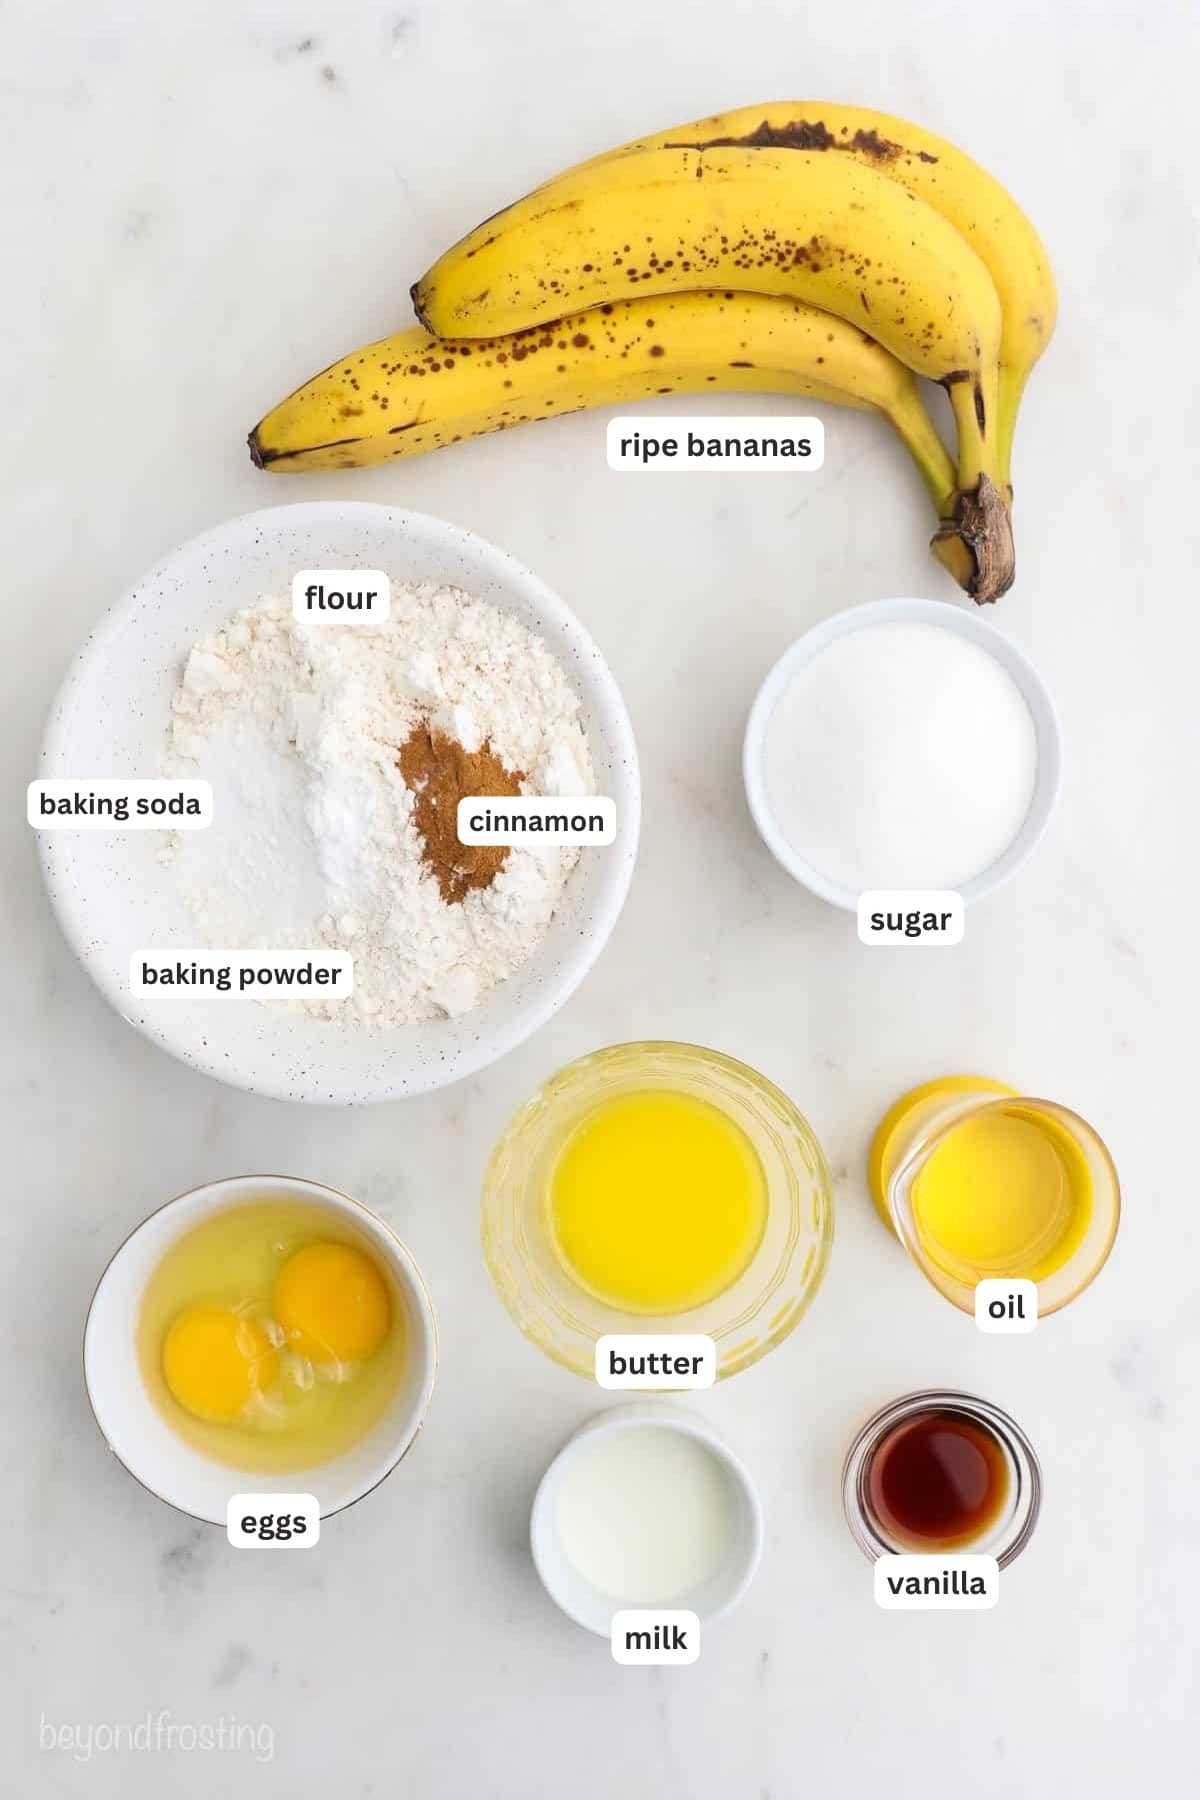 Ingredients for banana bread on a marble counter.